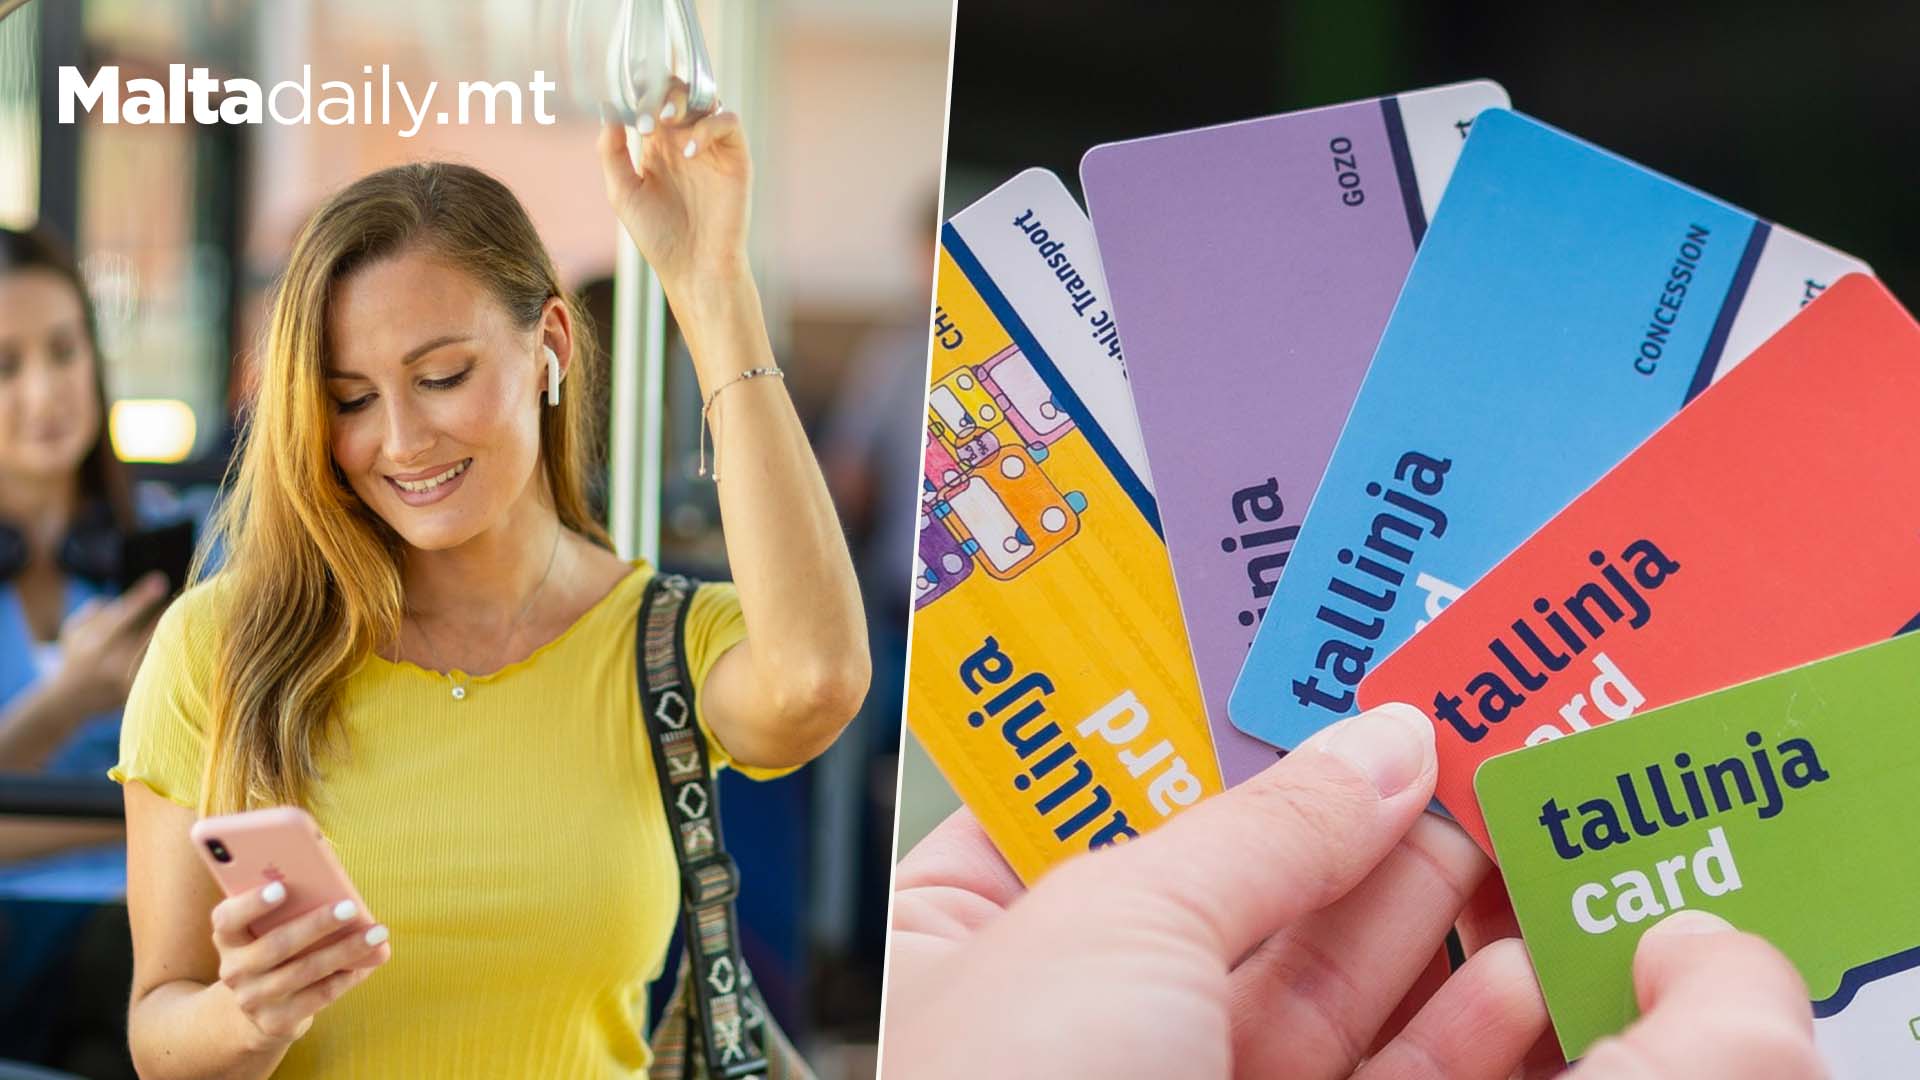 You Can Freely Apply For Tal-Linja Card Till The End Of February